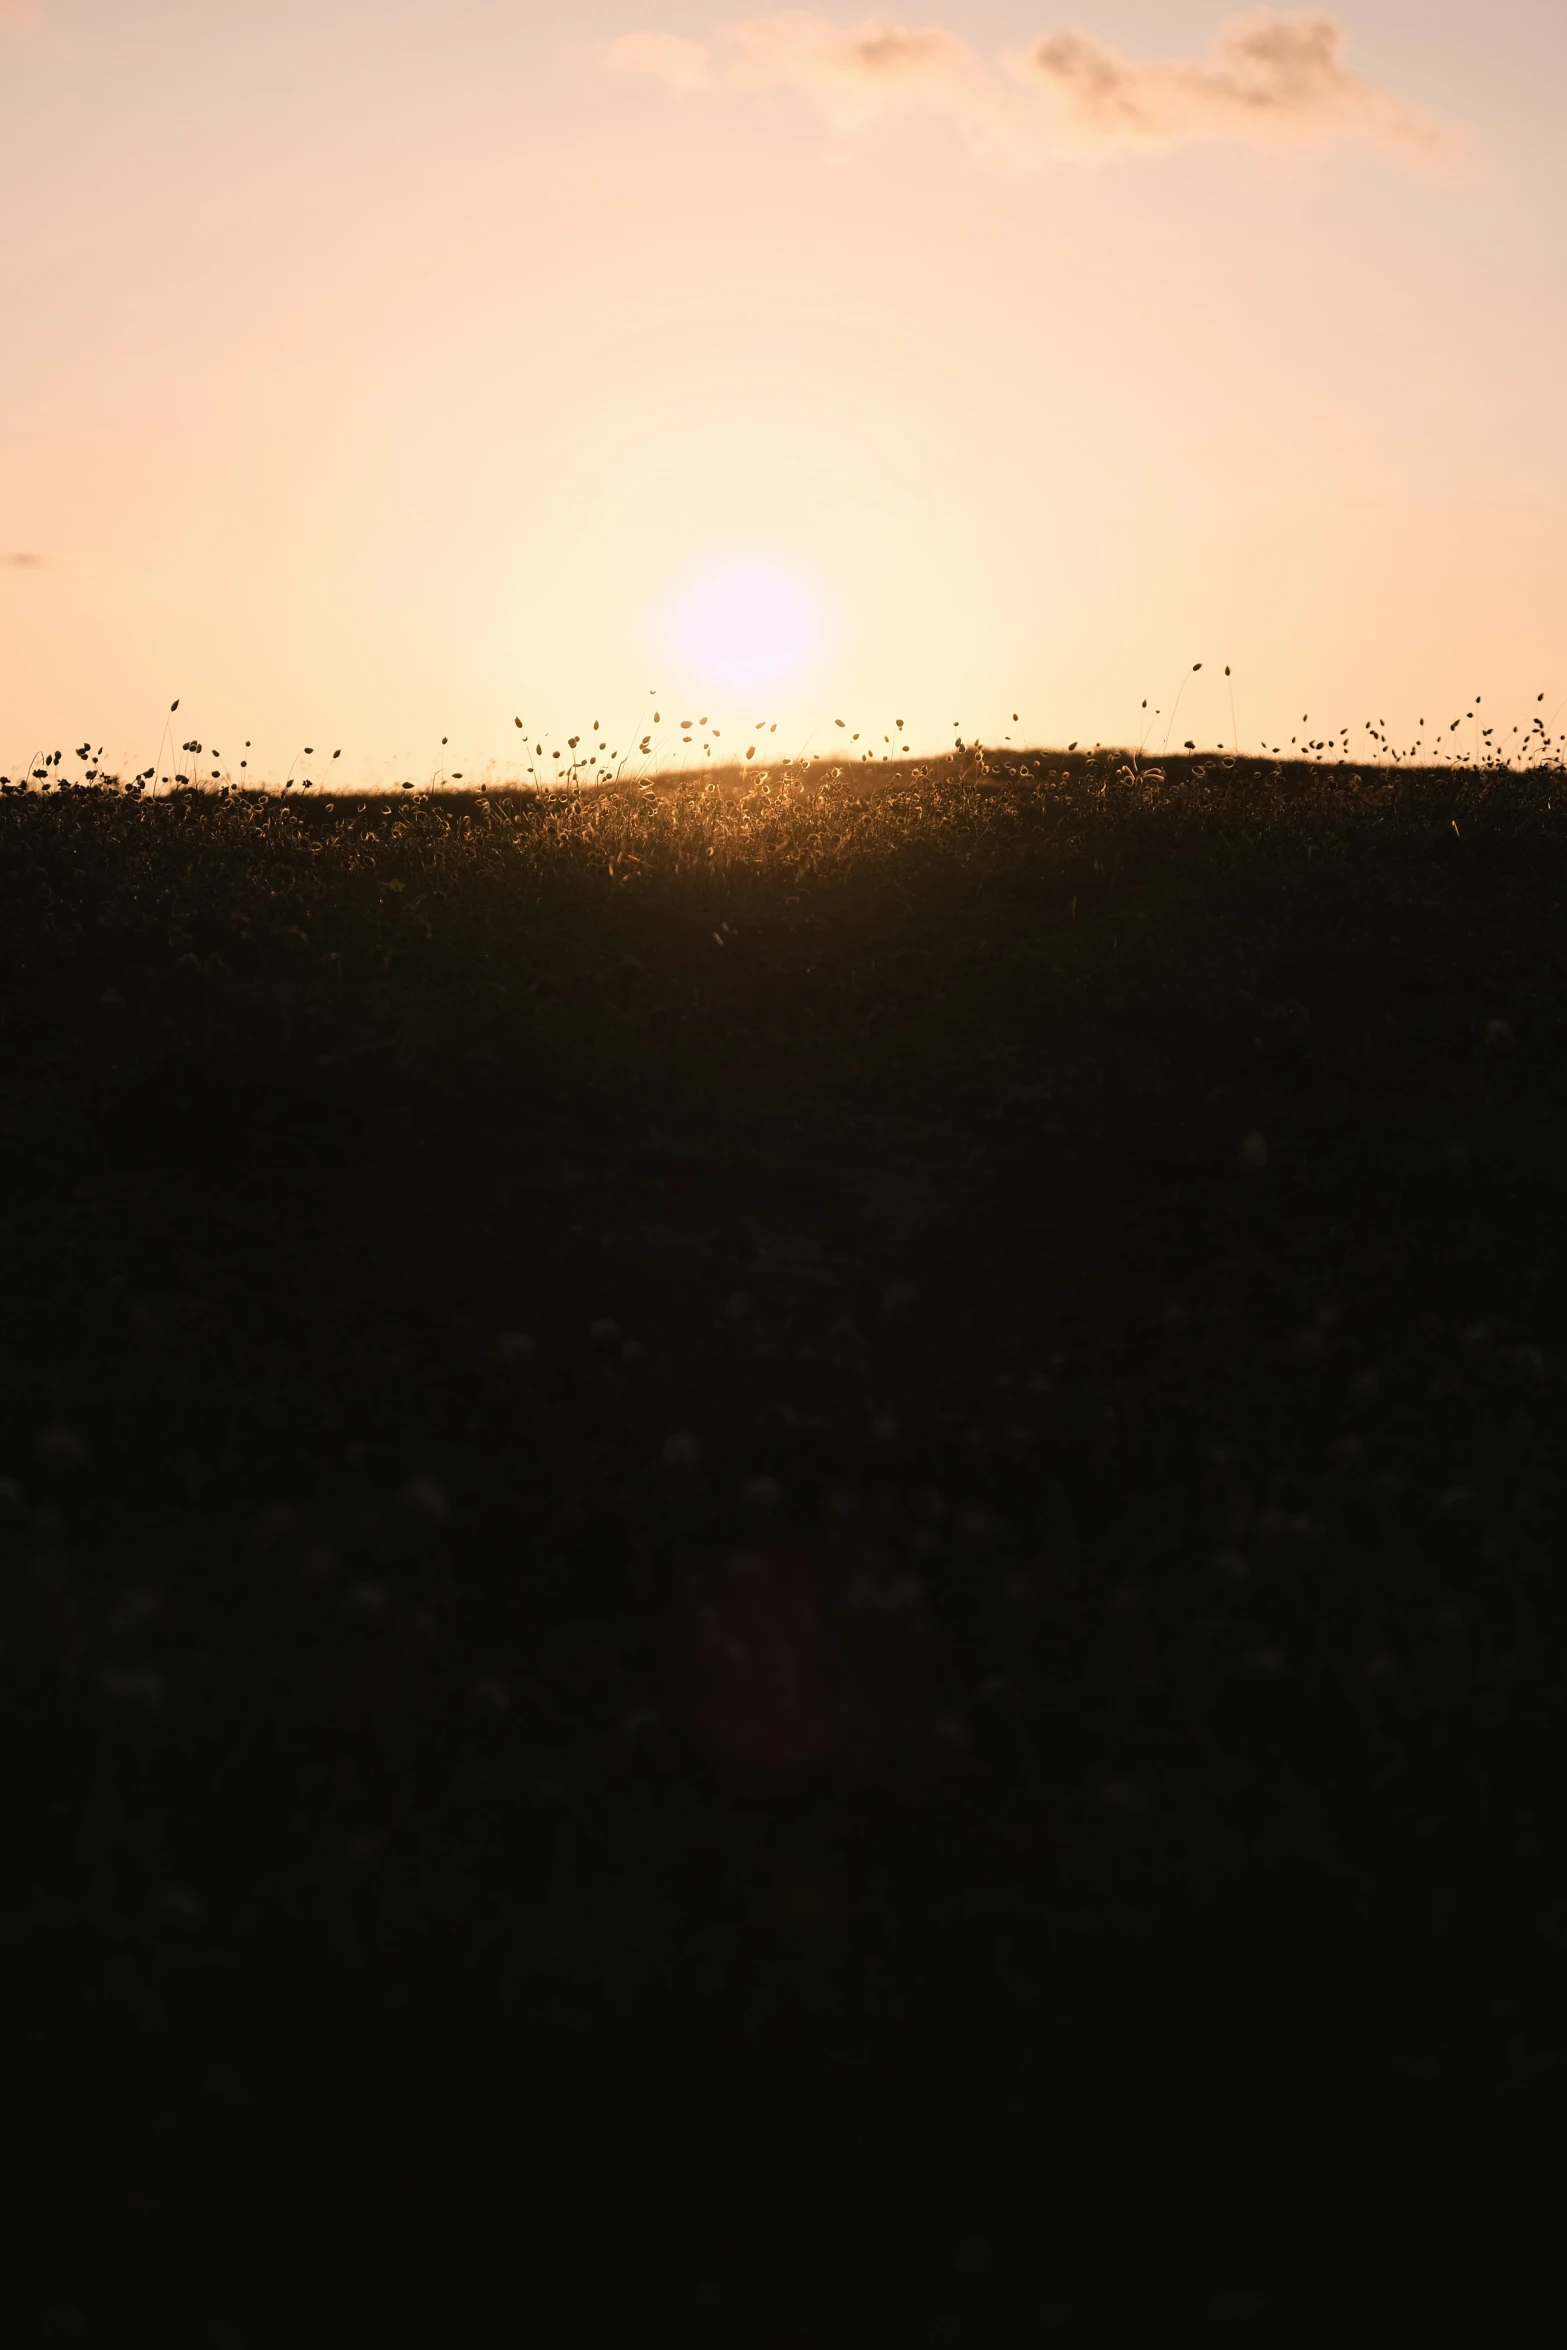 an image of sunset over grassy field with bird flying